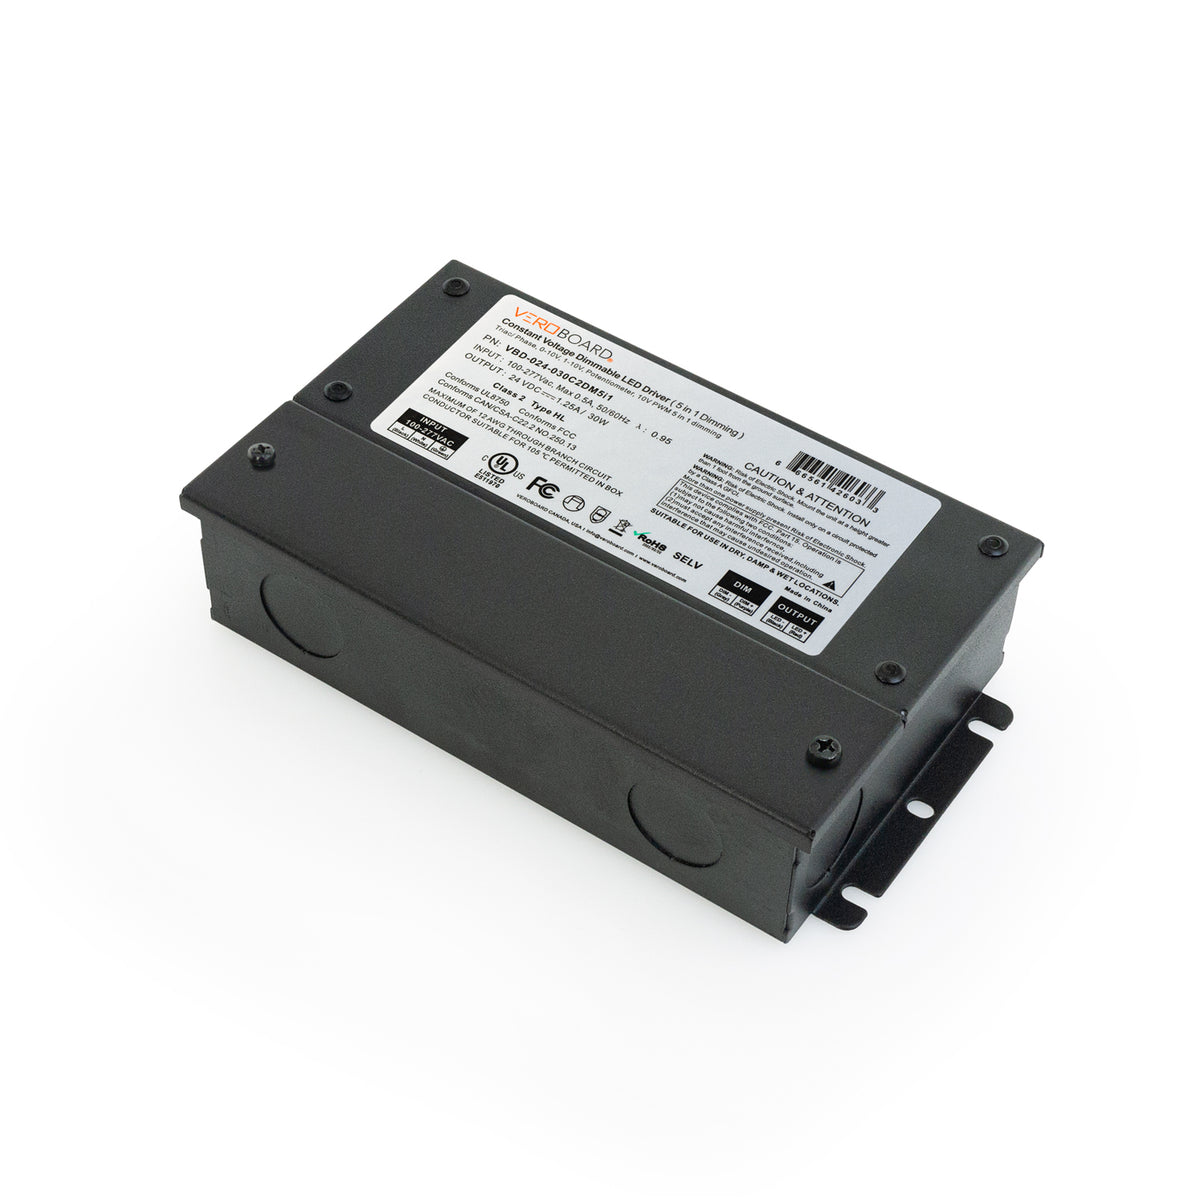 VBD-024-030C2DM5i1 Constant Voltage Dimmable Driver (5 in 1), Veroboard